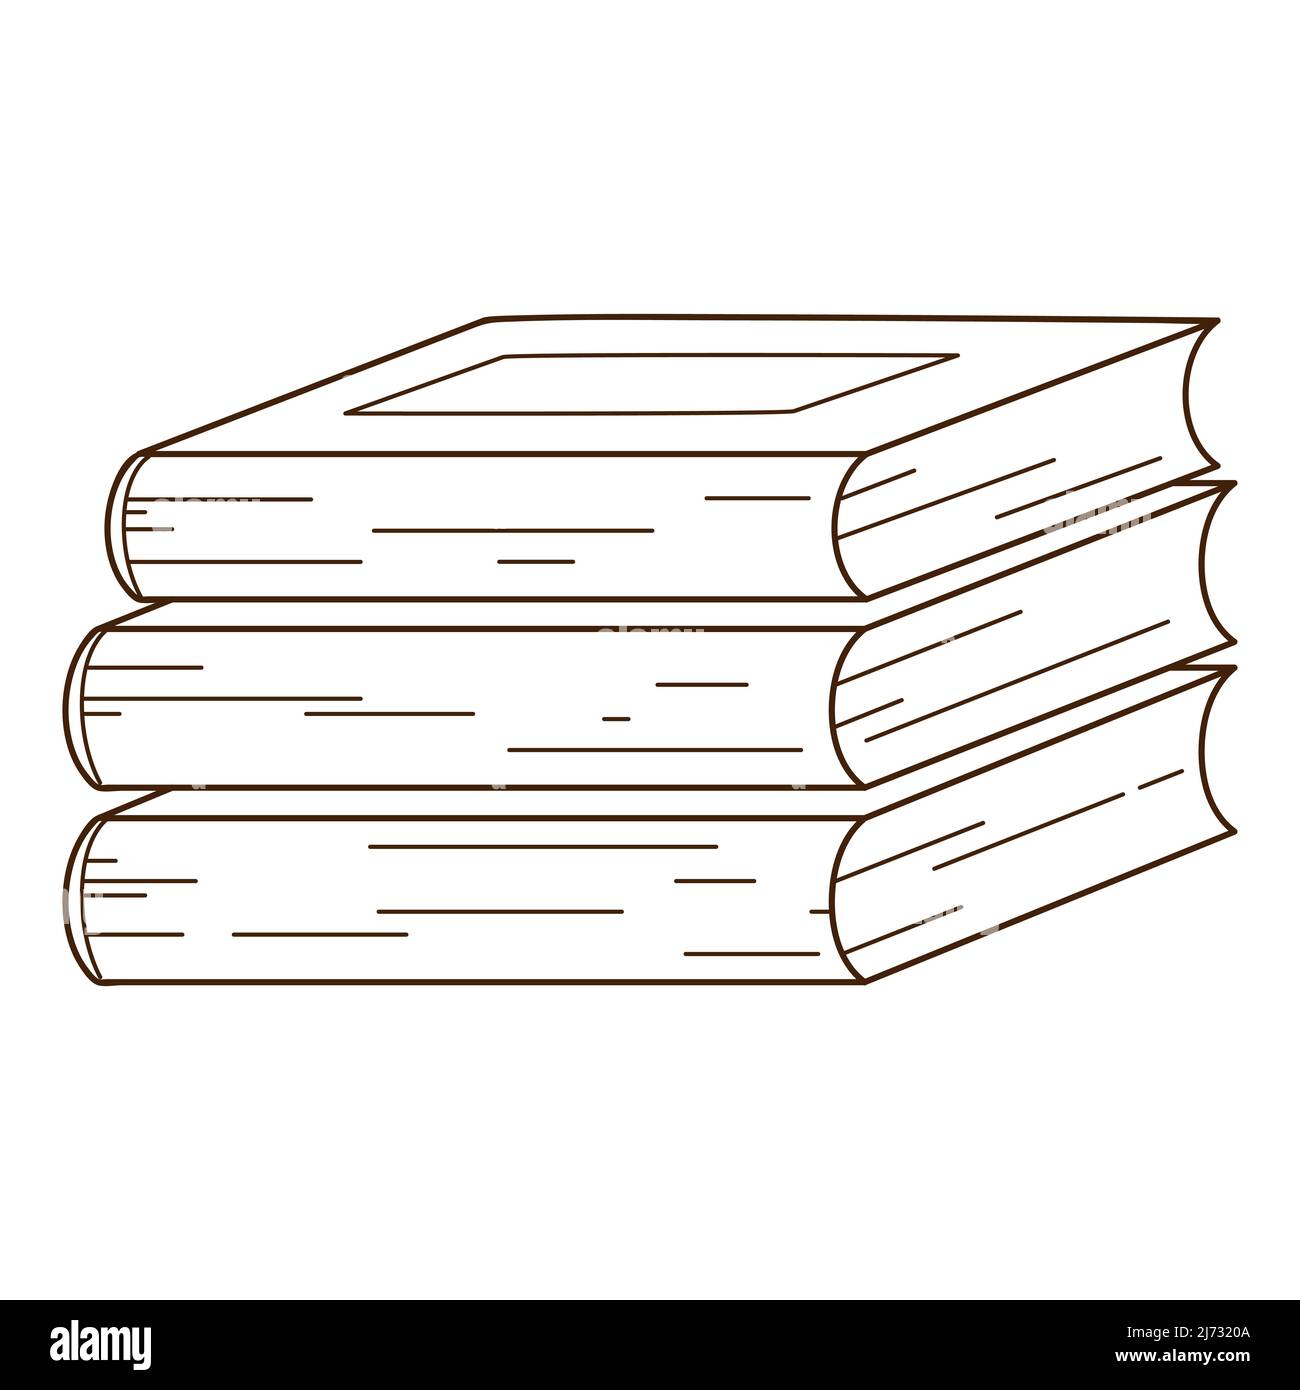 https://c8.alamy.com/comp/2J7320A/a-stack-of-books-reading-learning-cozy-home-design-element-with-outline-doodle-hand-drawn-black-white-vector-illustration-isolated-on-a-white-2J7320A.jpg